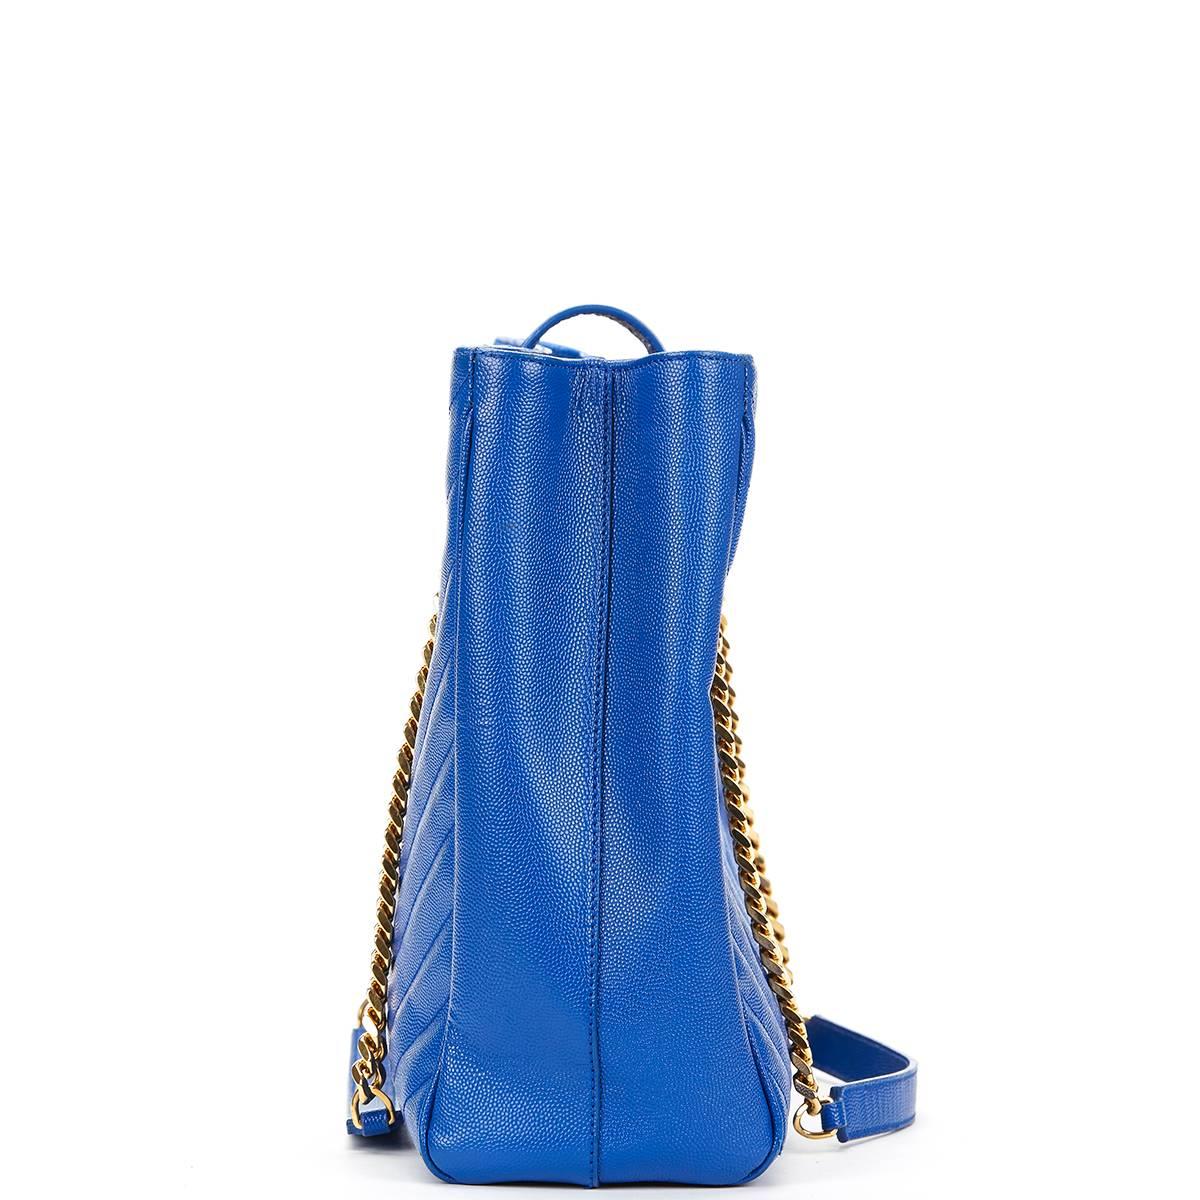 SAINT LAURENT
Electric Blue Textured Calfskin Large Monogram Tote

This SAINT LAURENT Large Monogram Tote is in Excellent Pre-Owned Condition accompanied by Saint Laurent Dust Bag. Circa 2014. Primarily made from Grained Calfskin complimented by